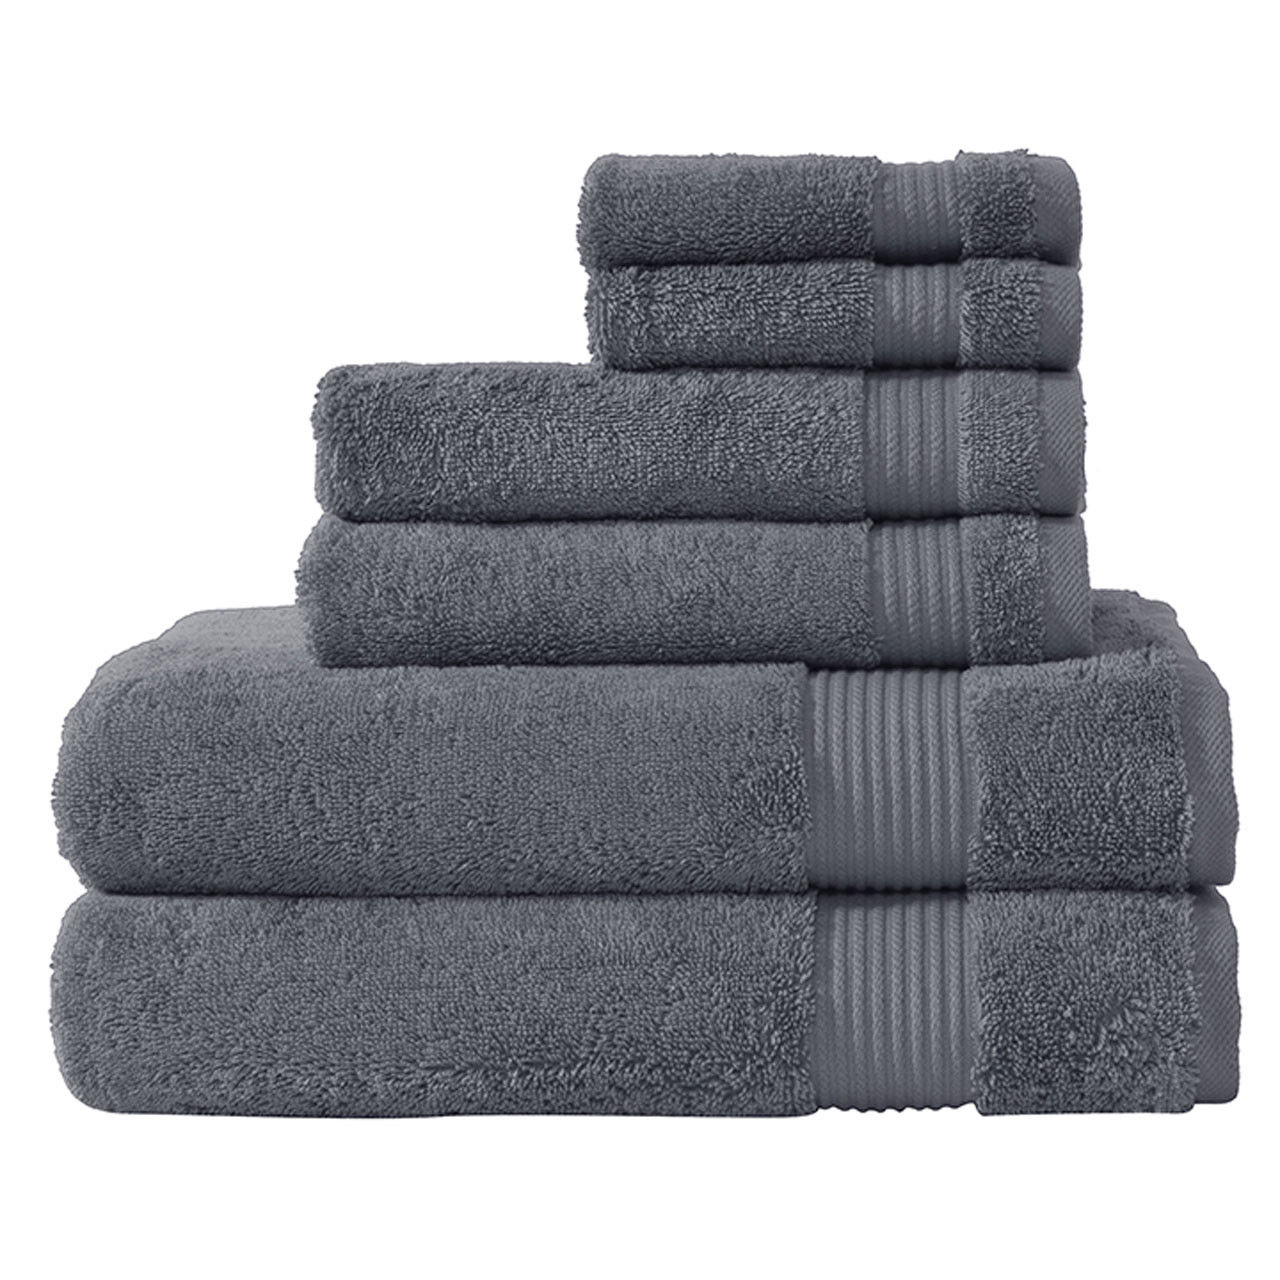 Can you specify the material used in the gray towels from the Amadeus Turkish Collection?